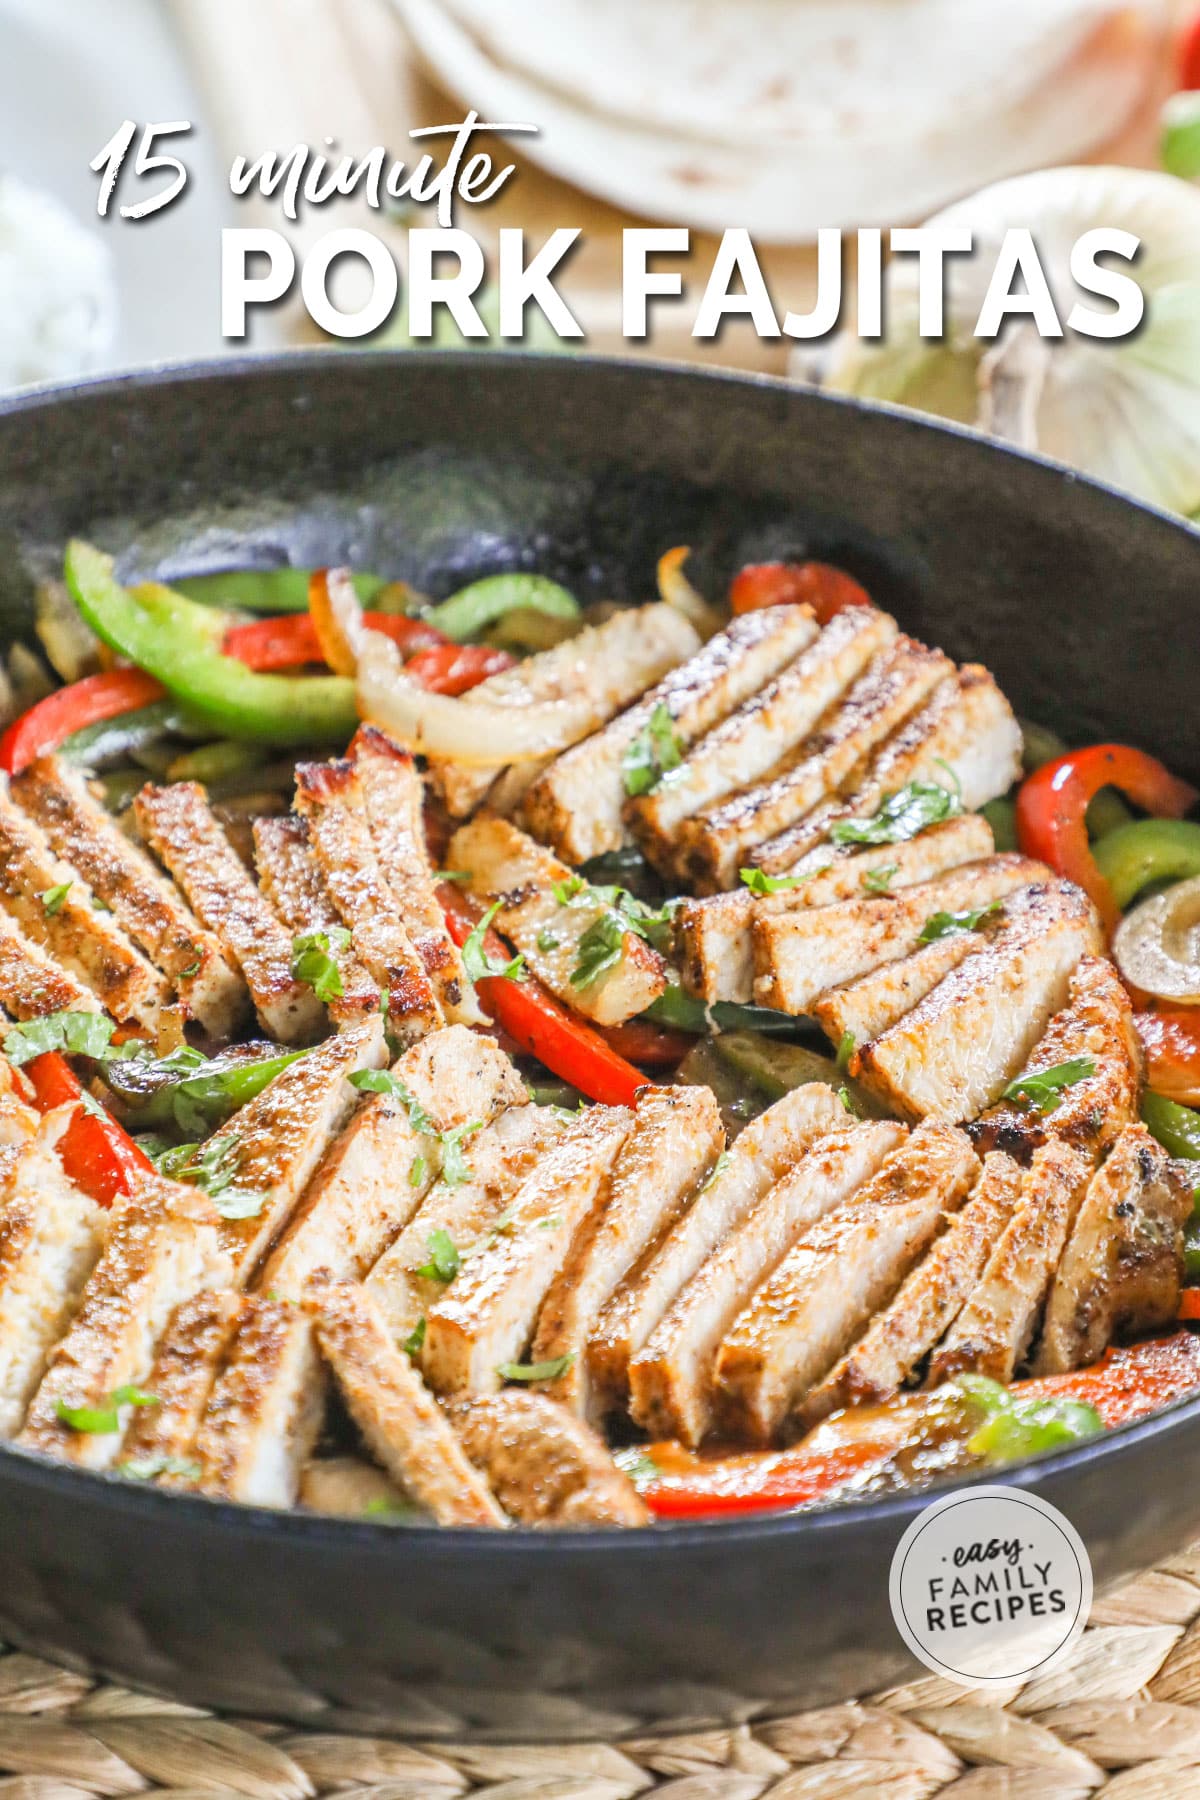 Slice pork, peppers, and onion in a skillet.